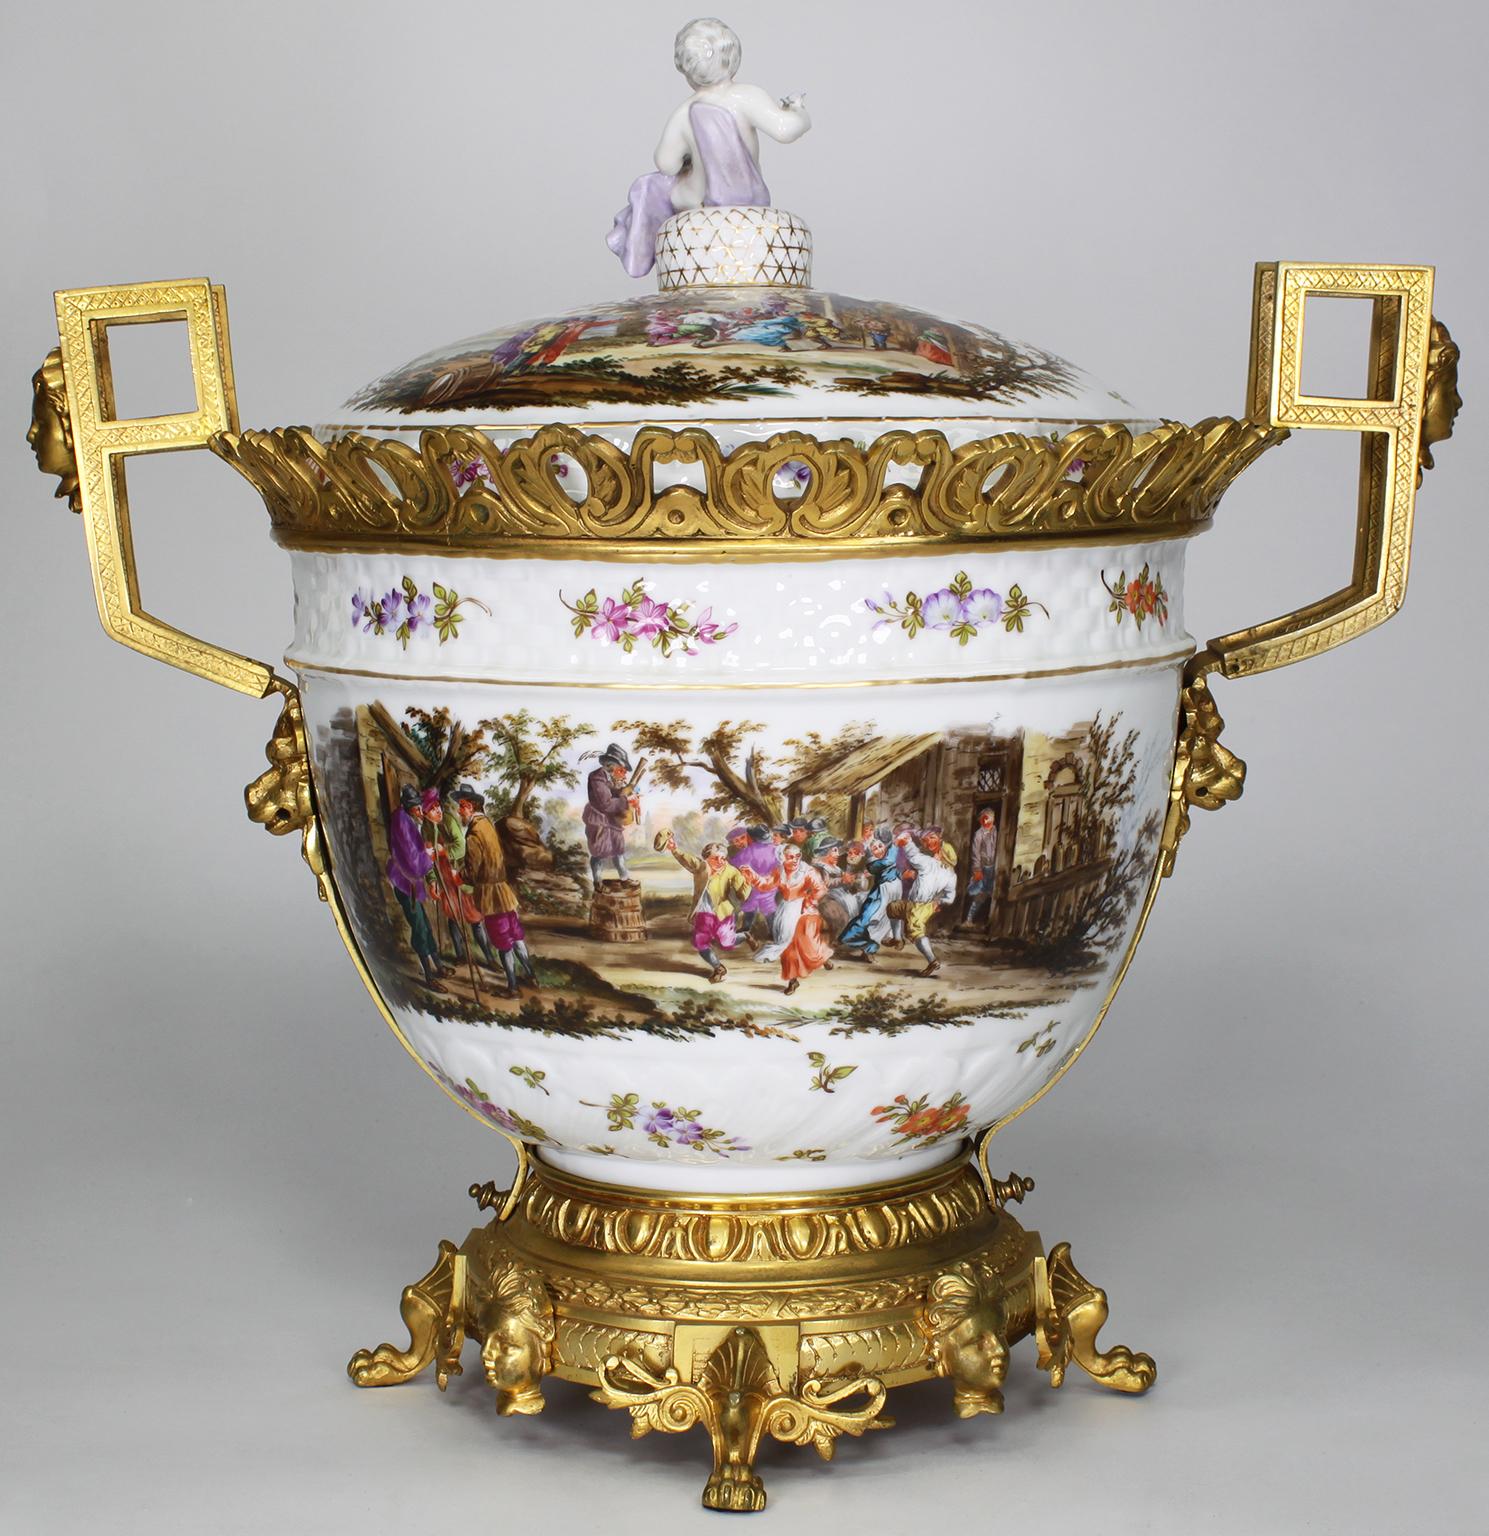 Early 20th Century Large German Porcelain & Gilt-Bronze Mounted Urn with Cover in Manner of Meissen For Sale